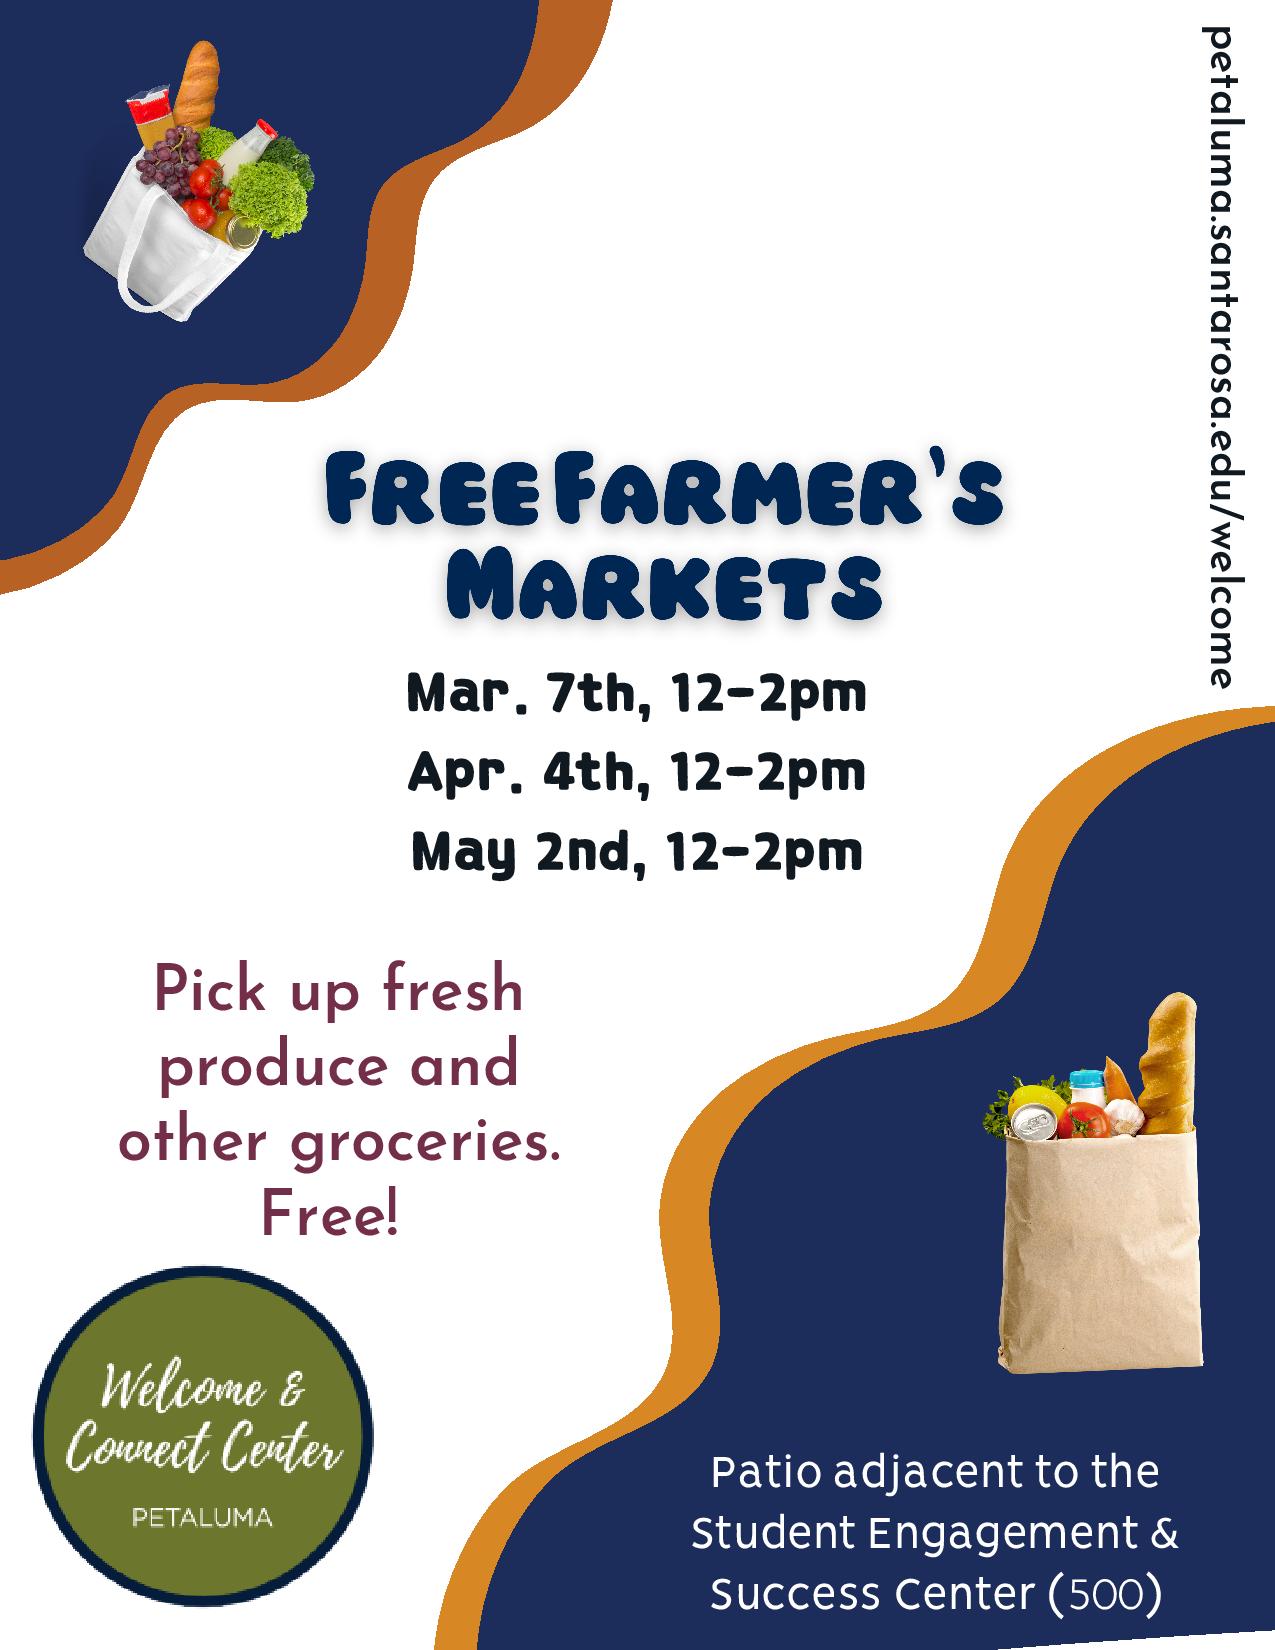 Free Farmers Markets at SRJC Petaluma! Mar. 7th, 12-2pm Apr. 4th, 12-2pm May 2nd, 12-2pm. Pick up fresh produce and other groceries. Free!  Patio adjacent to the Student Engagement & Success Center (500). petaluma.santarosa.edu/welcome 